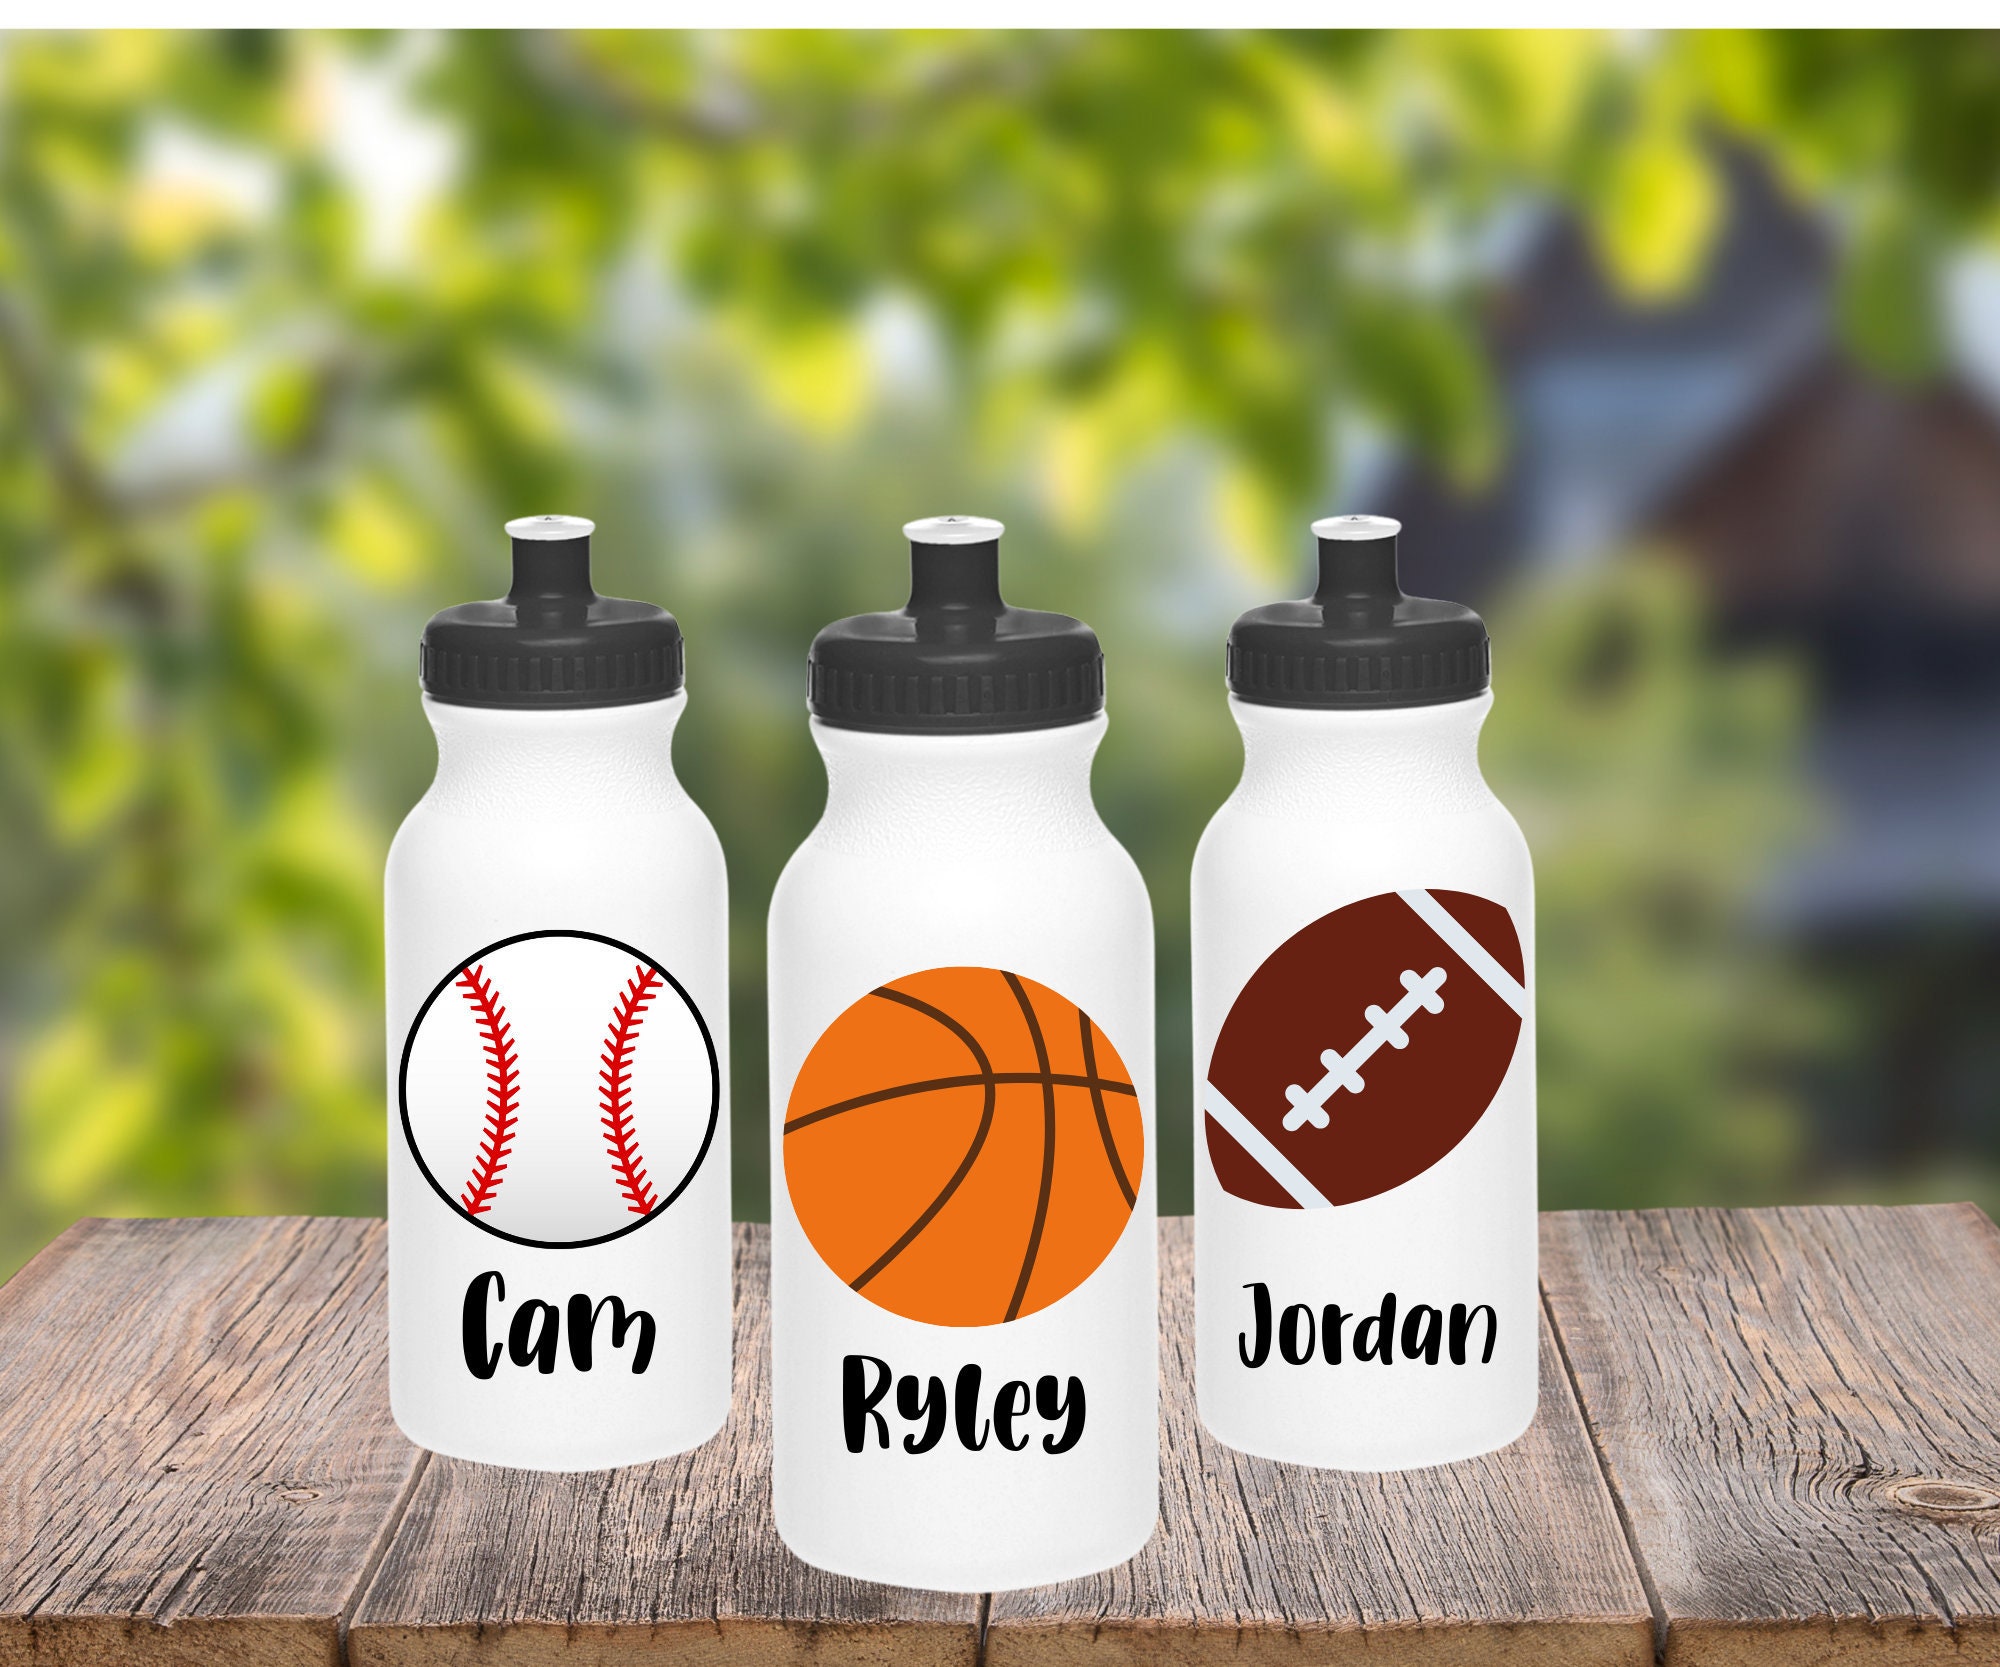 20oz Insulated Water Bottle With Flip Top Chug Spout / Large Strawless  Stainless Steel Water Bottle Personalized With Engraved Name 